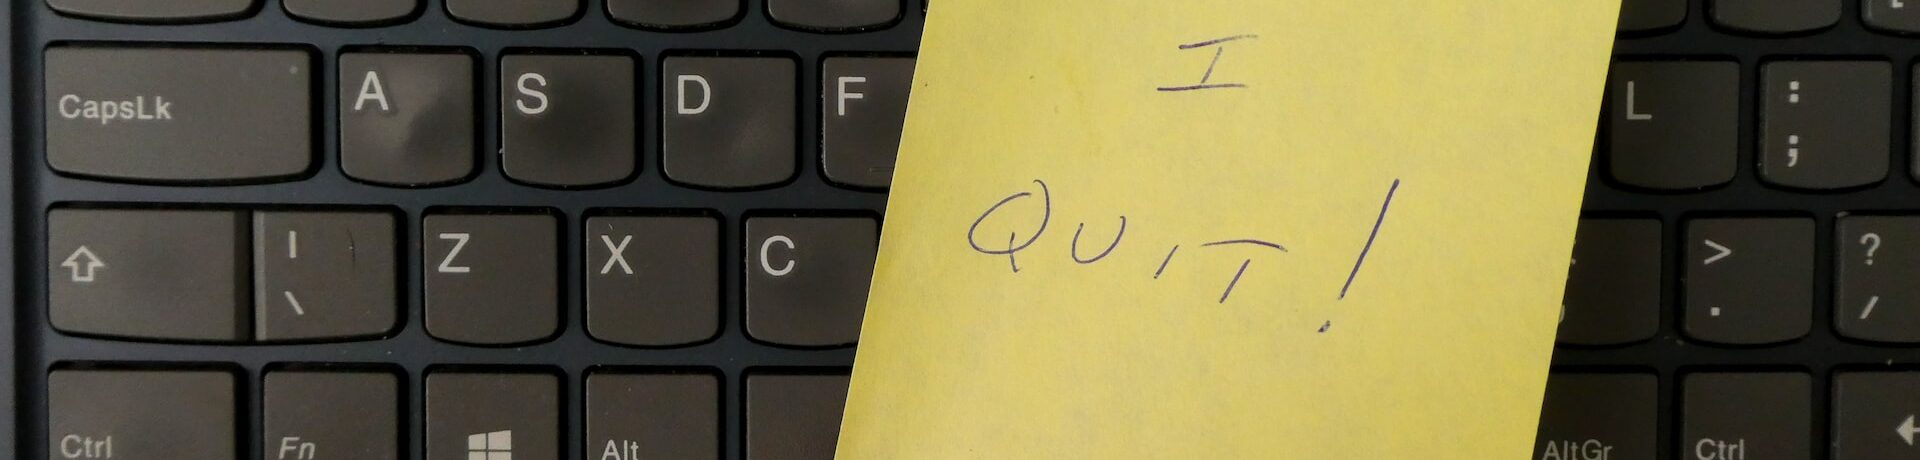 sticky note on keyboard stating "I Quit" showing resignation from job